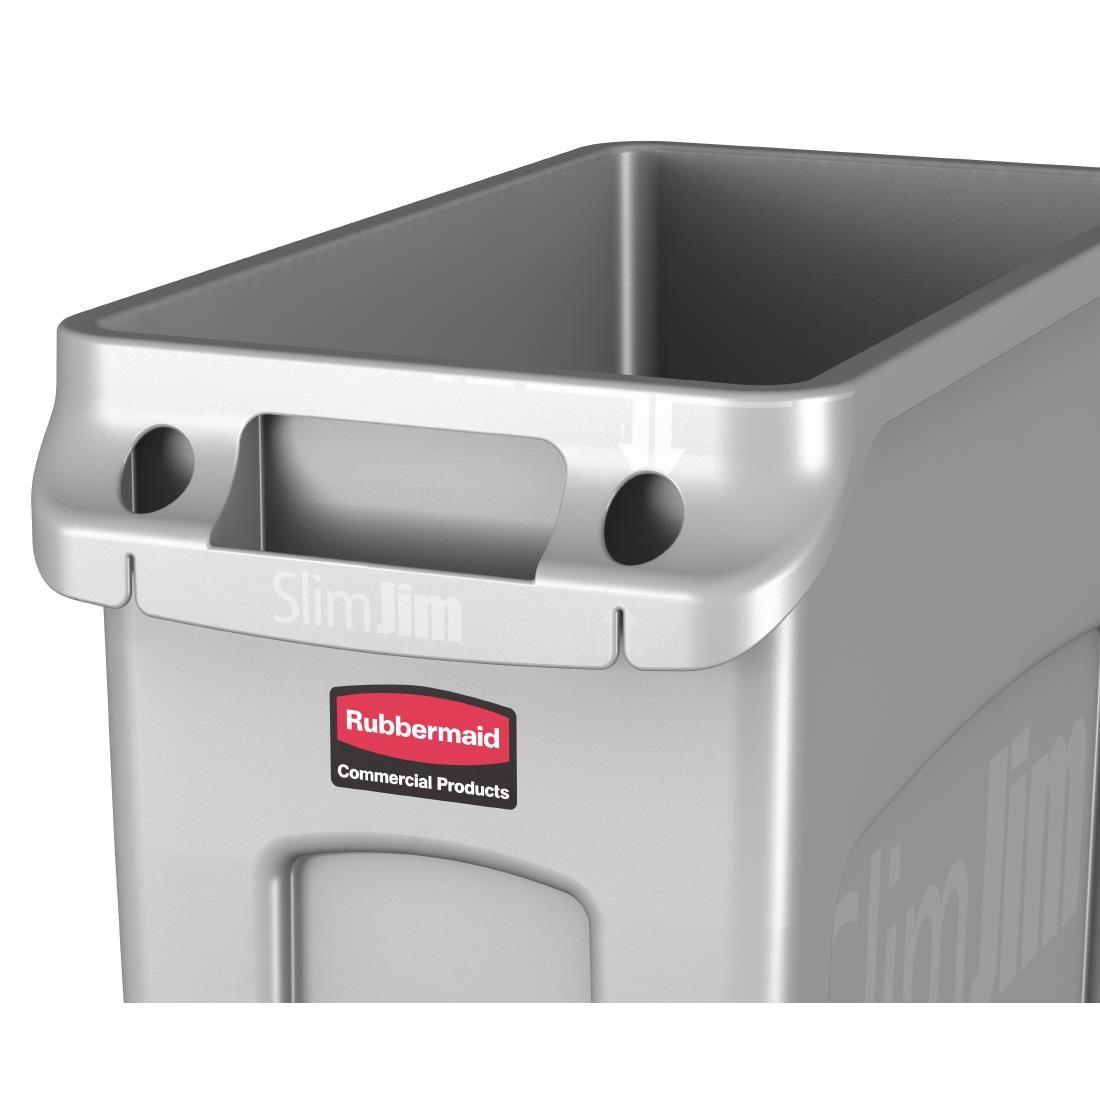 Rubbermaid Slim Jim Container With Venting Channels Grey 60Ltr - F603  - 9